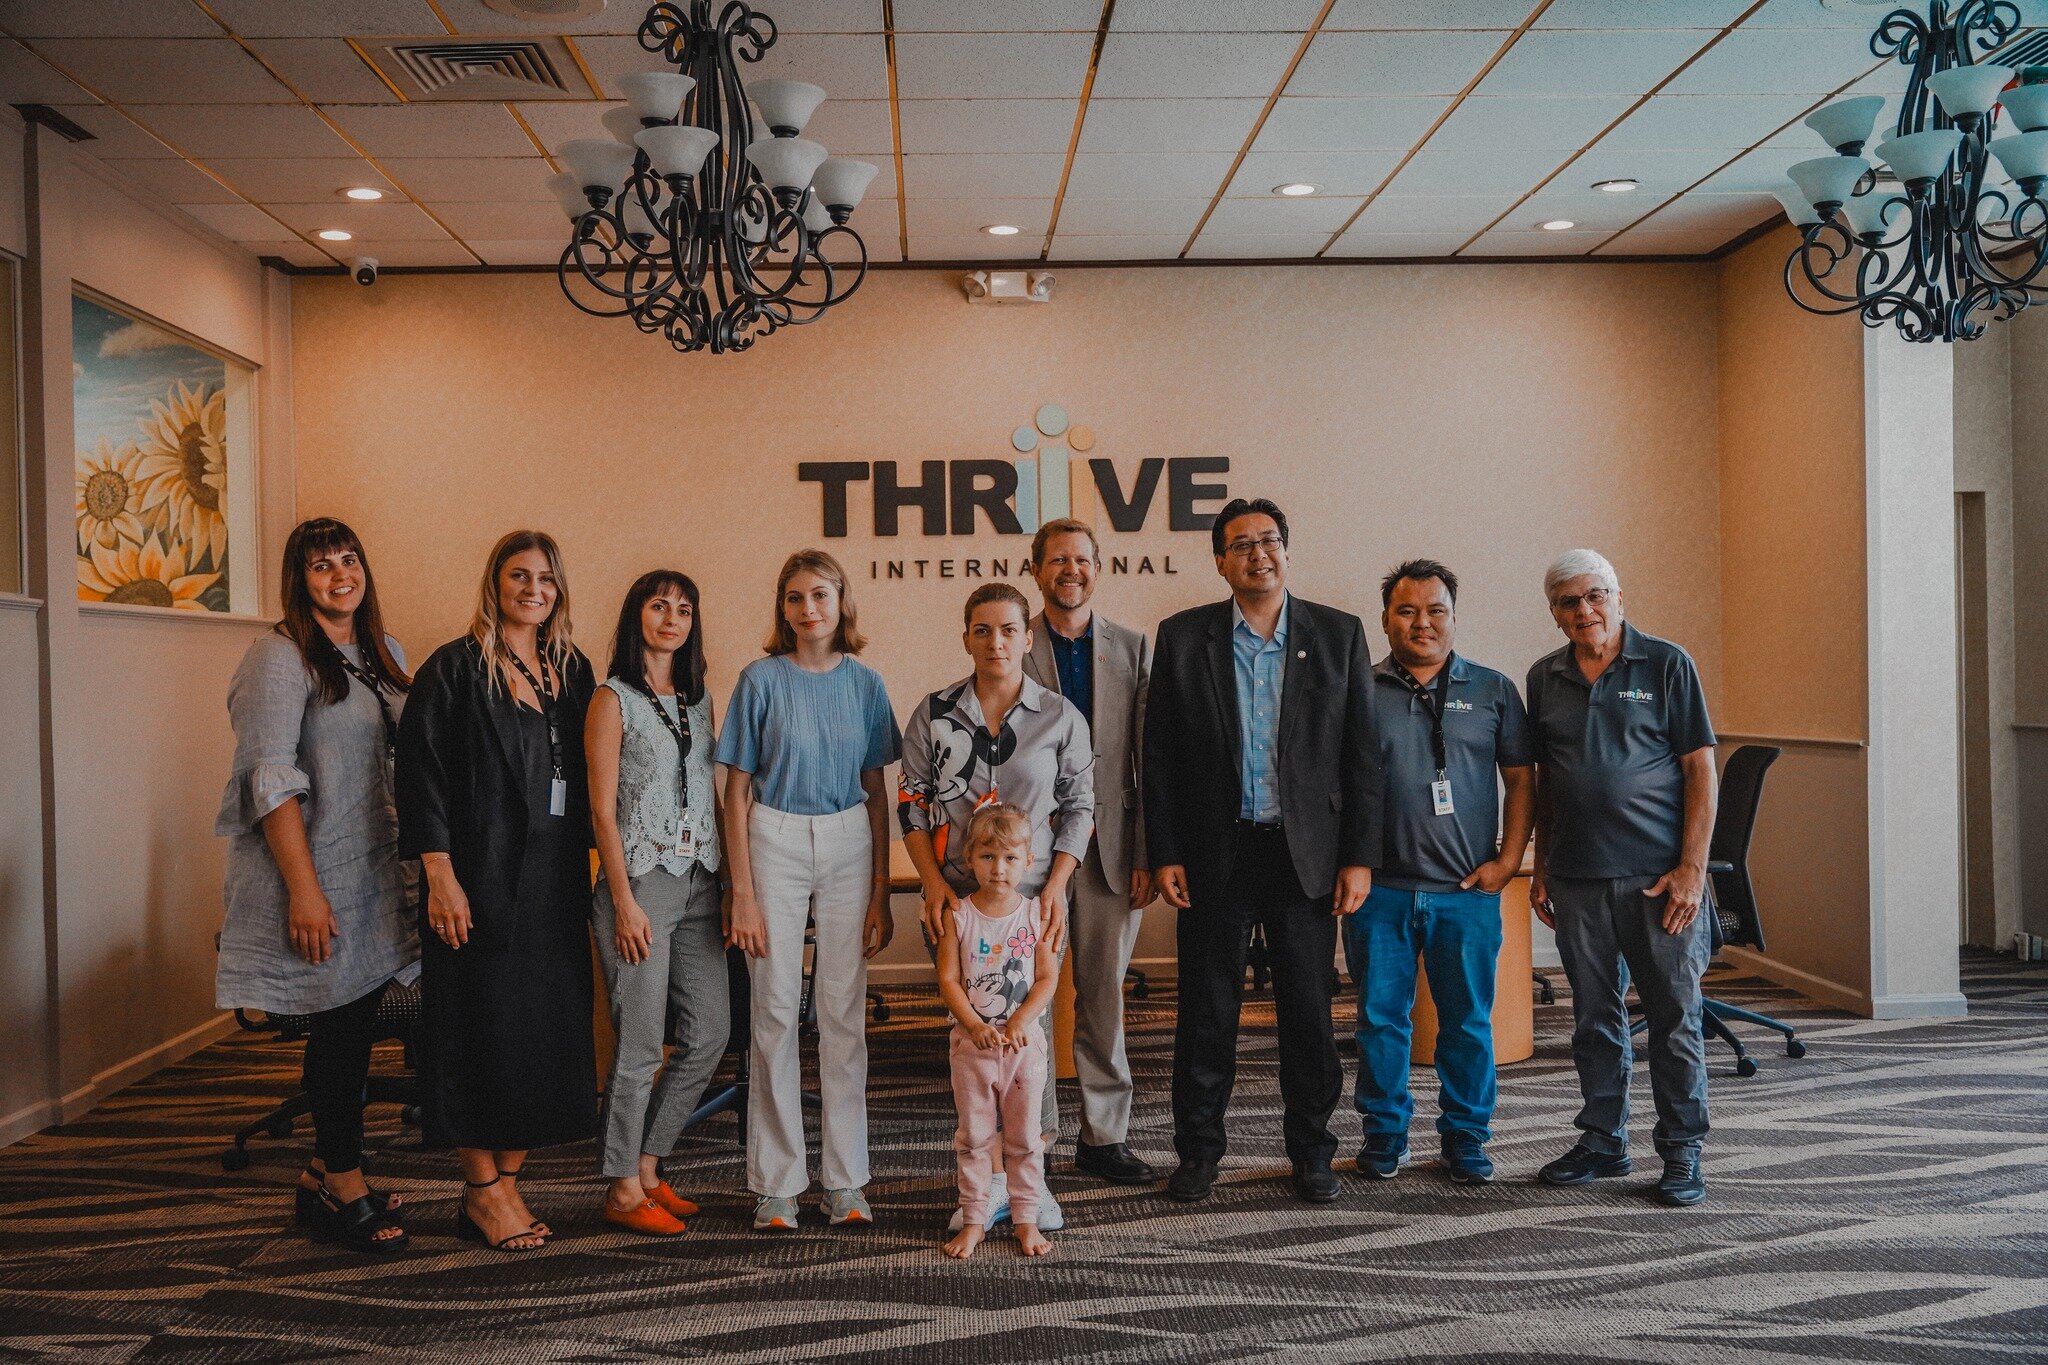 Mike Fong, Director of the Washington State Department of Commerce, visited Thrive Center yesterday. Thank you for your partnership to help refugees move from surviving to thriving! 💛💚💙

#TogetherWeThrive